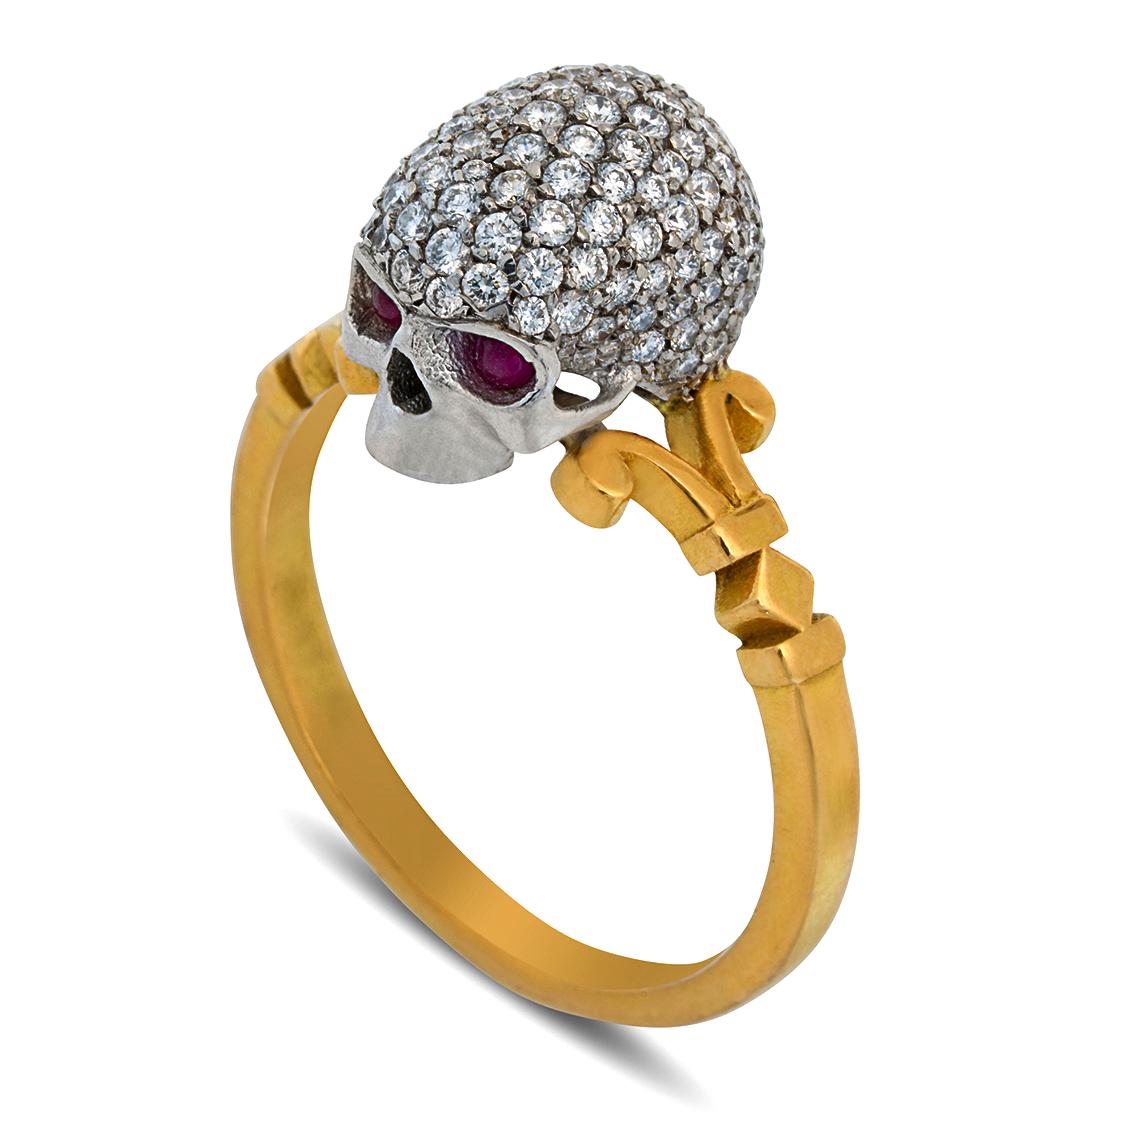 Handcrafted in 18kt yellow and white gold, this show-stopping ring features a baroque style diamond encrusted 18kt white gold skull with piercing ruby eyes perched atop a signature scrolled William Llewellyn Griffiths split shank. 

Measuring 9.5mm